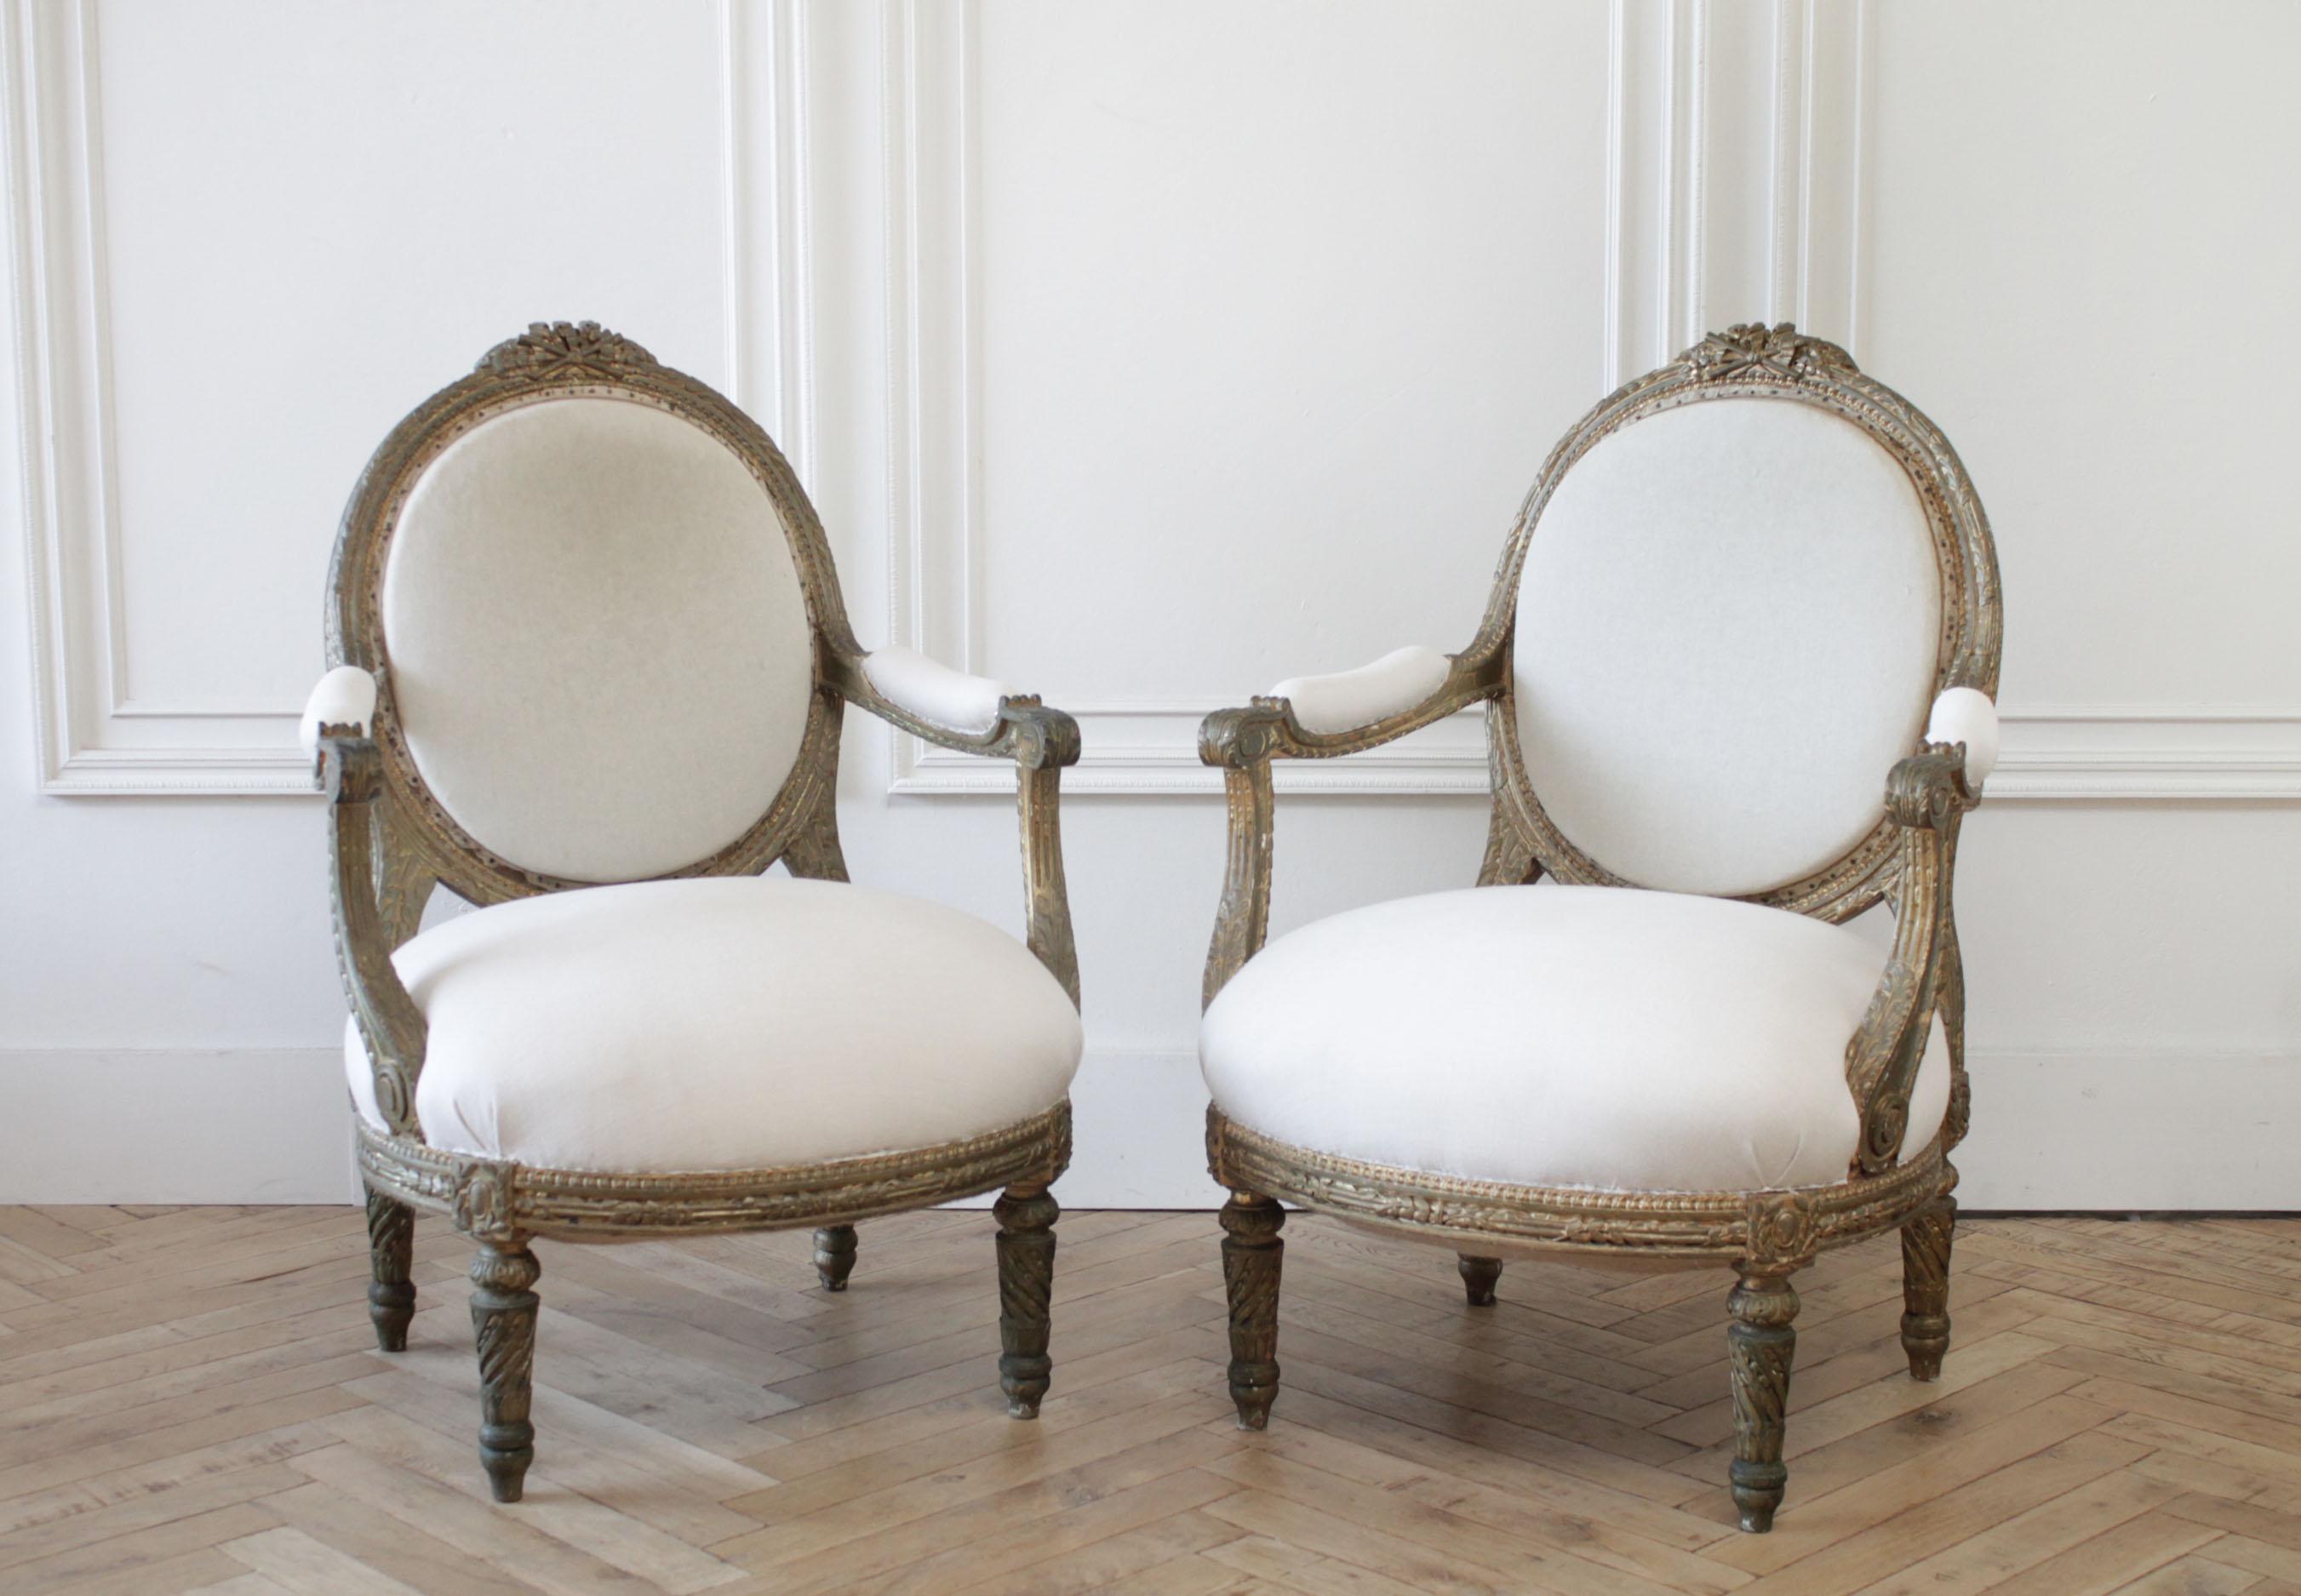 Louis XVI style giltwood open armchairs.
The back is original muslin upholstery, with nail trim, and the seats are upholstered in a light natural oatmeal linen. The frames are solid and sturdy, ready for everyday use. Gilt wood finish has age and